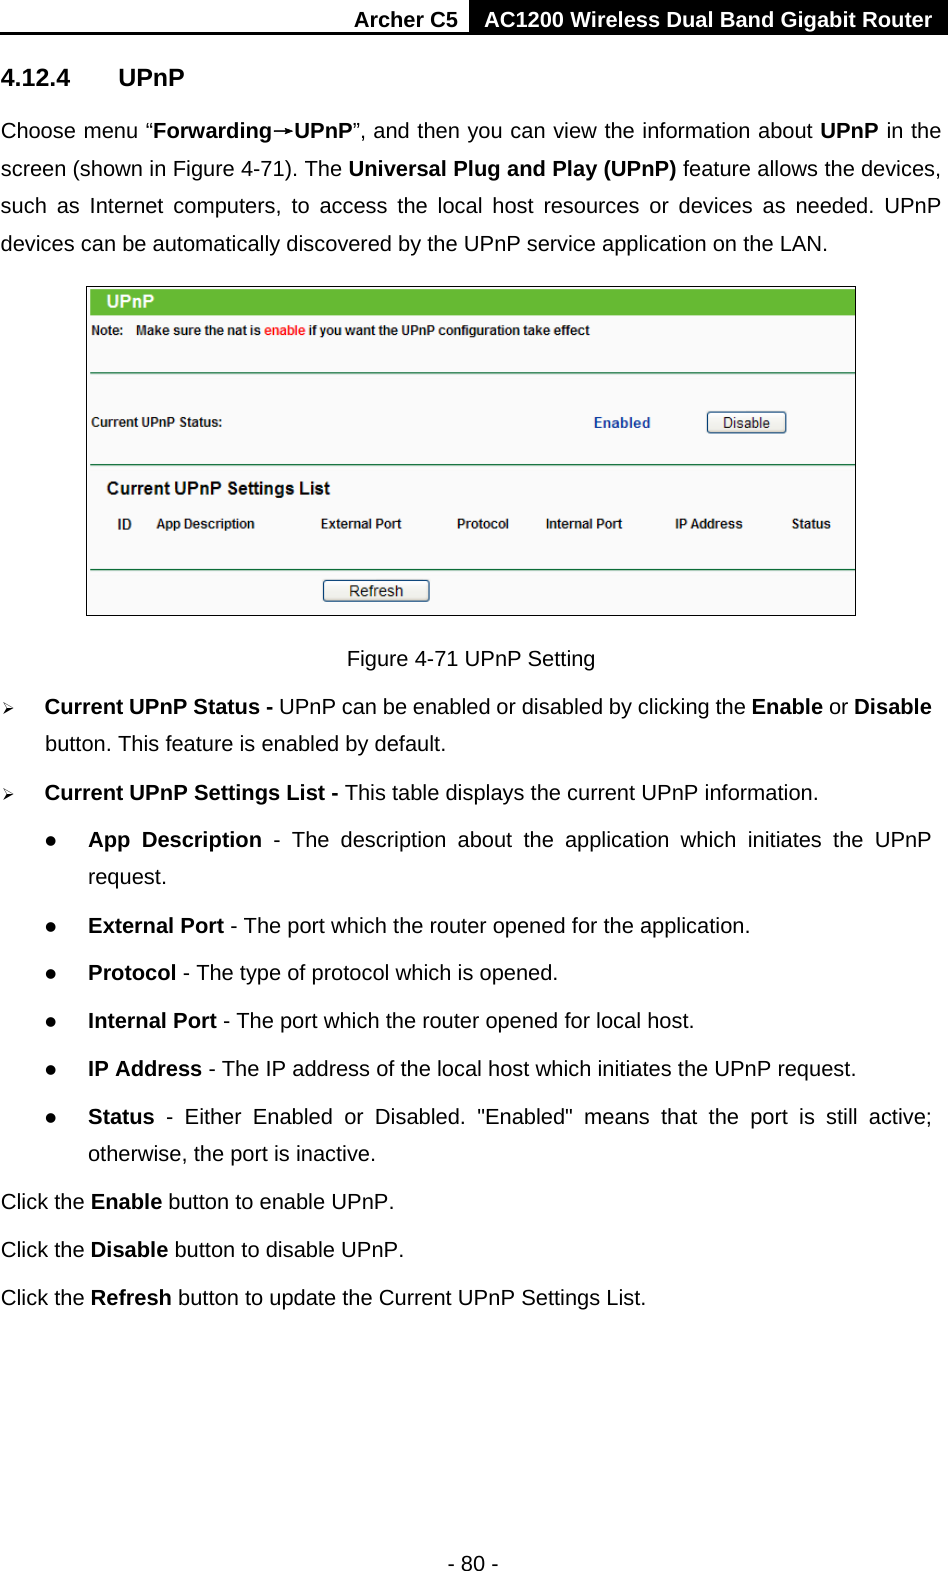 Archer C5 AC1200 Wireless Dual Band Gigabit Router  - 80 - 4.12.4 UPnP Choose menu “Forwarding→UPnP”, and then you can view the information about UPnP in the screen (shown in Figure 4-71). The Universal Plug and Play (UPnP) feature allows the devices, such as Internet computers, to access the local host resources or devices as needed. UPnP devices can be automatically discovered by the UPnP service application on the LAN.  Figure 4-71 UPnP Setting  Current UPnP Status - UPnP can be enabled or disabled by clicking the Enable or Disable button. This feature is enabled by default.  Current UPnP Settings List - This table displays the current UPnP information.  App Description - The description about the application which initiates the UPnP request.    External Port - The port which the router opened for the application.    Protocol - The type of protocol which is opened.    Internal Port - The port which the router opened for local host.    IP Address - The IP address of the local host which initiates the UPnP request.    Status  -  Either Enabled or Disabled.  &quot;Enabled&quot; means that the  port is still active; otherwise, the port is inactive.   Click the Enable button to enable UPnP. Click the Disable button to disable UPnP. Click the Refresh button to update the Current UPnP Settings List. 